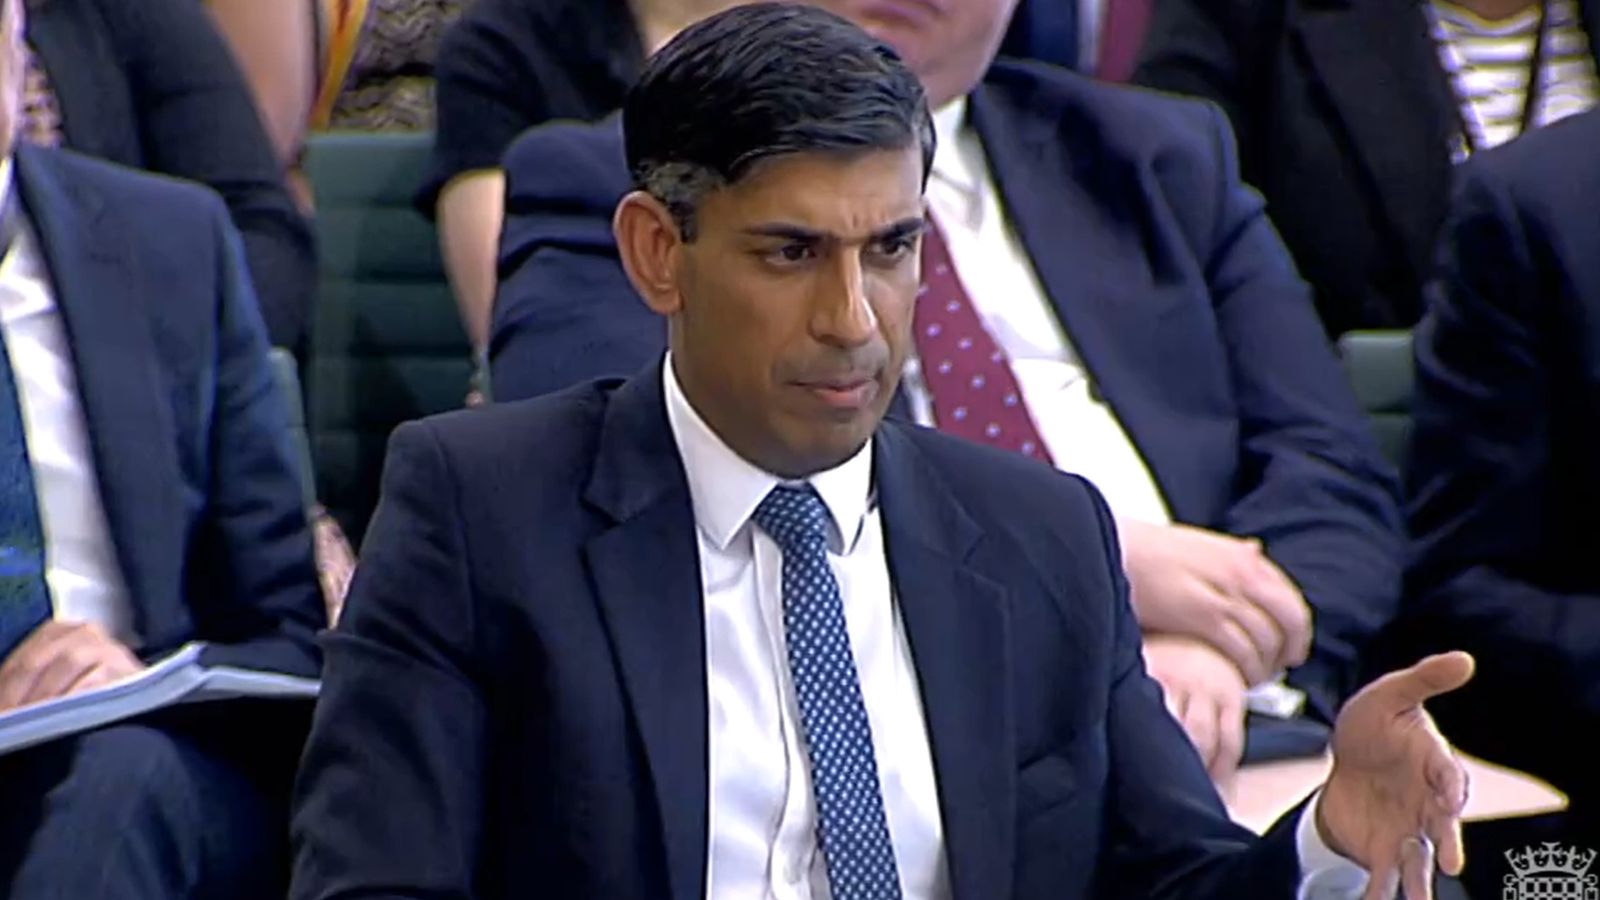 Rishi Sunak: Key questions were cut short - but that didn't stop prime minister getting skewered at the Liaison Committee